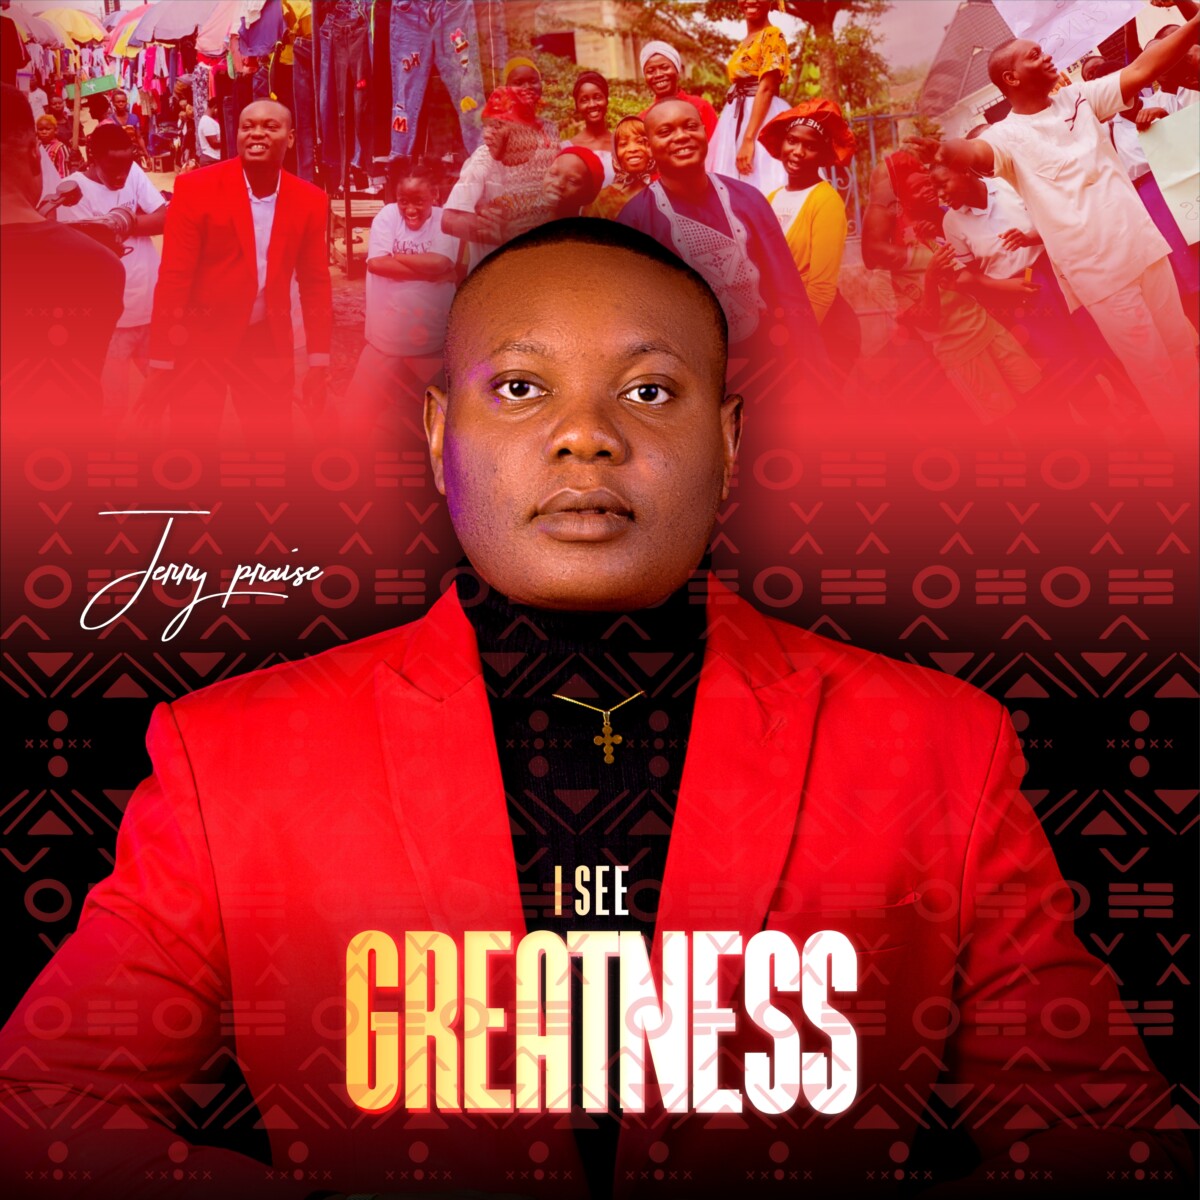 Jerry Praise -“I See Greatness